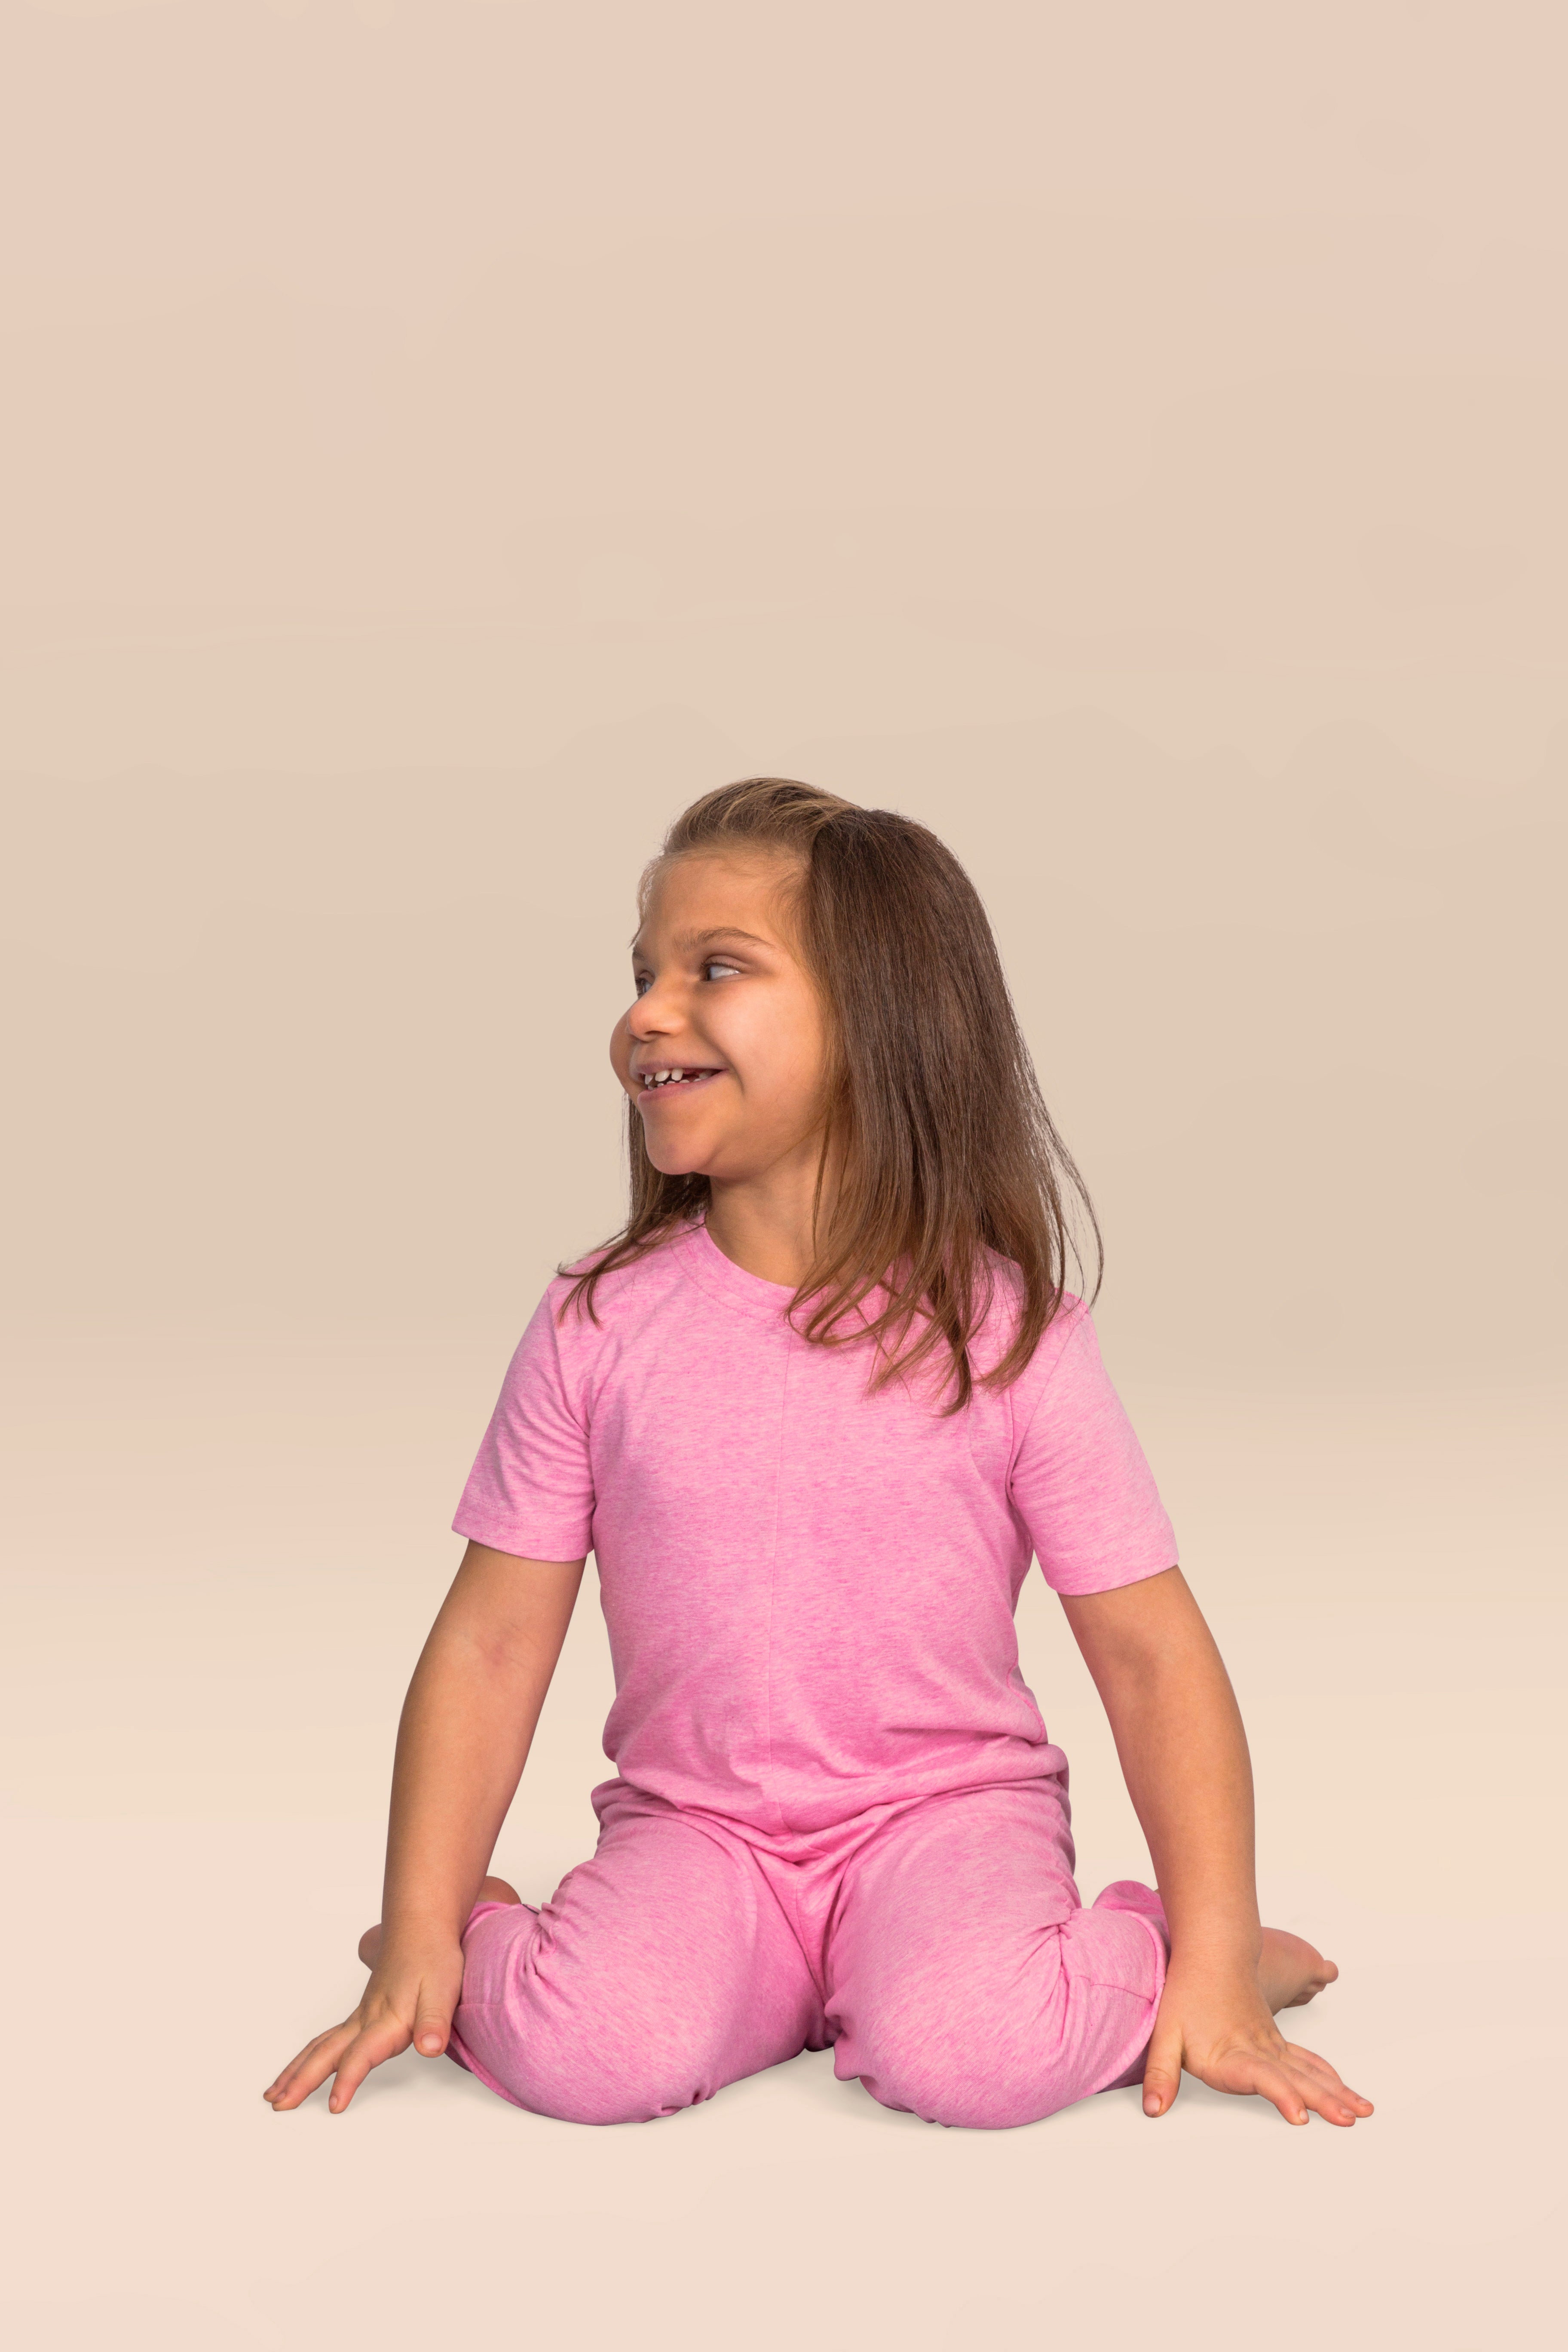 KayCey_Adaptive_clothing_for_older_children_with_special_needs_Short_Sleeve_long_leg_lifestyleimage